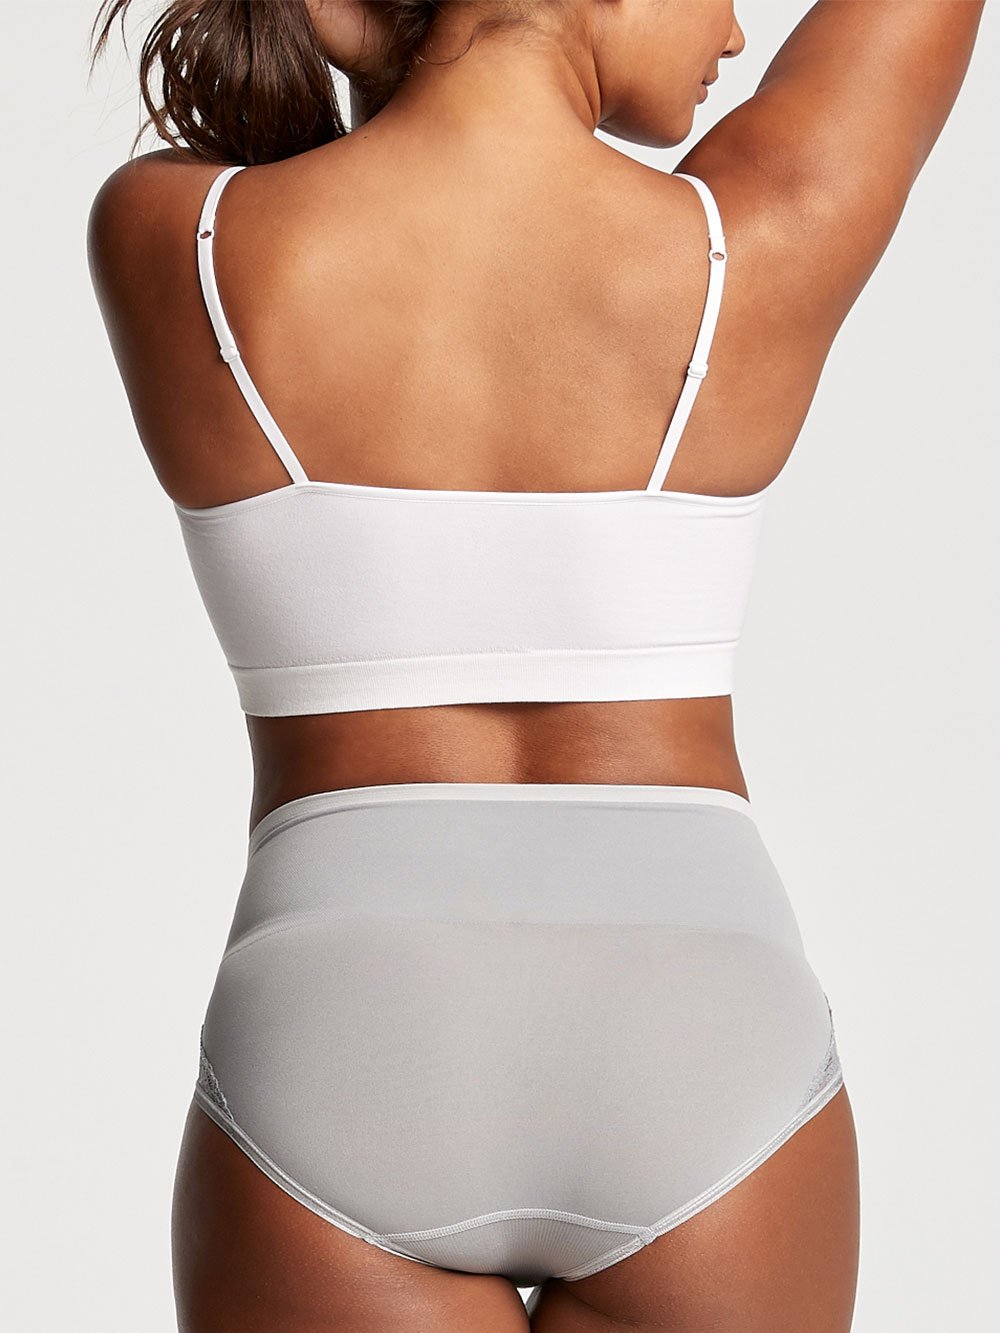 Yummie Cooling FX Singlet Shapewear  Anthropologie Singapore Official Site